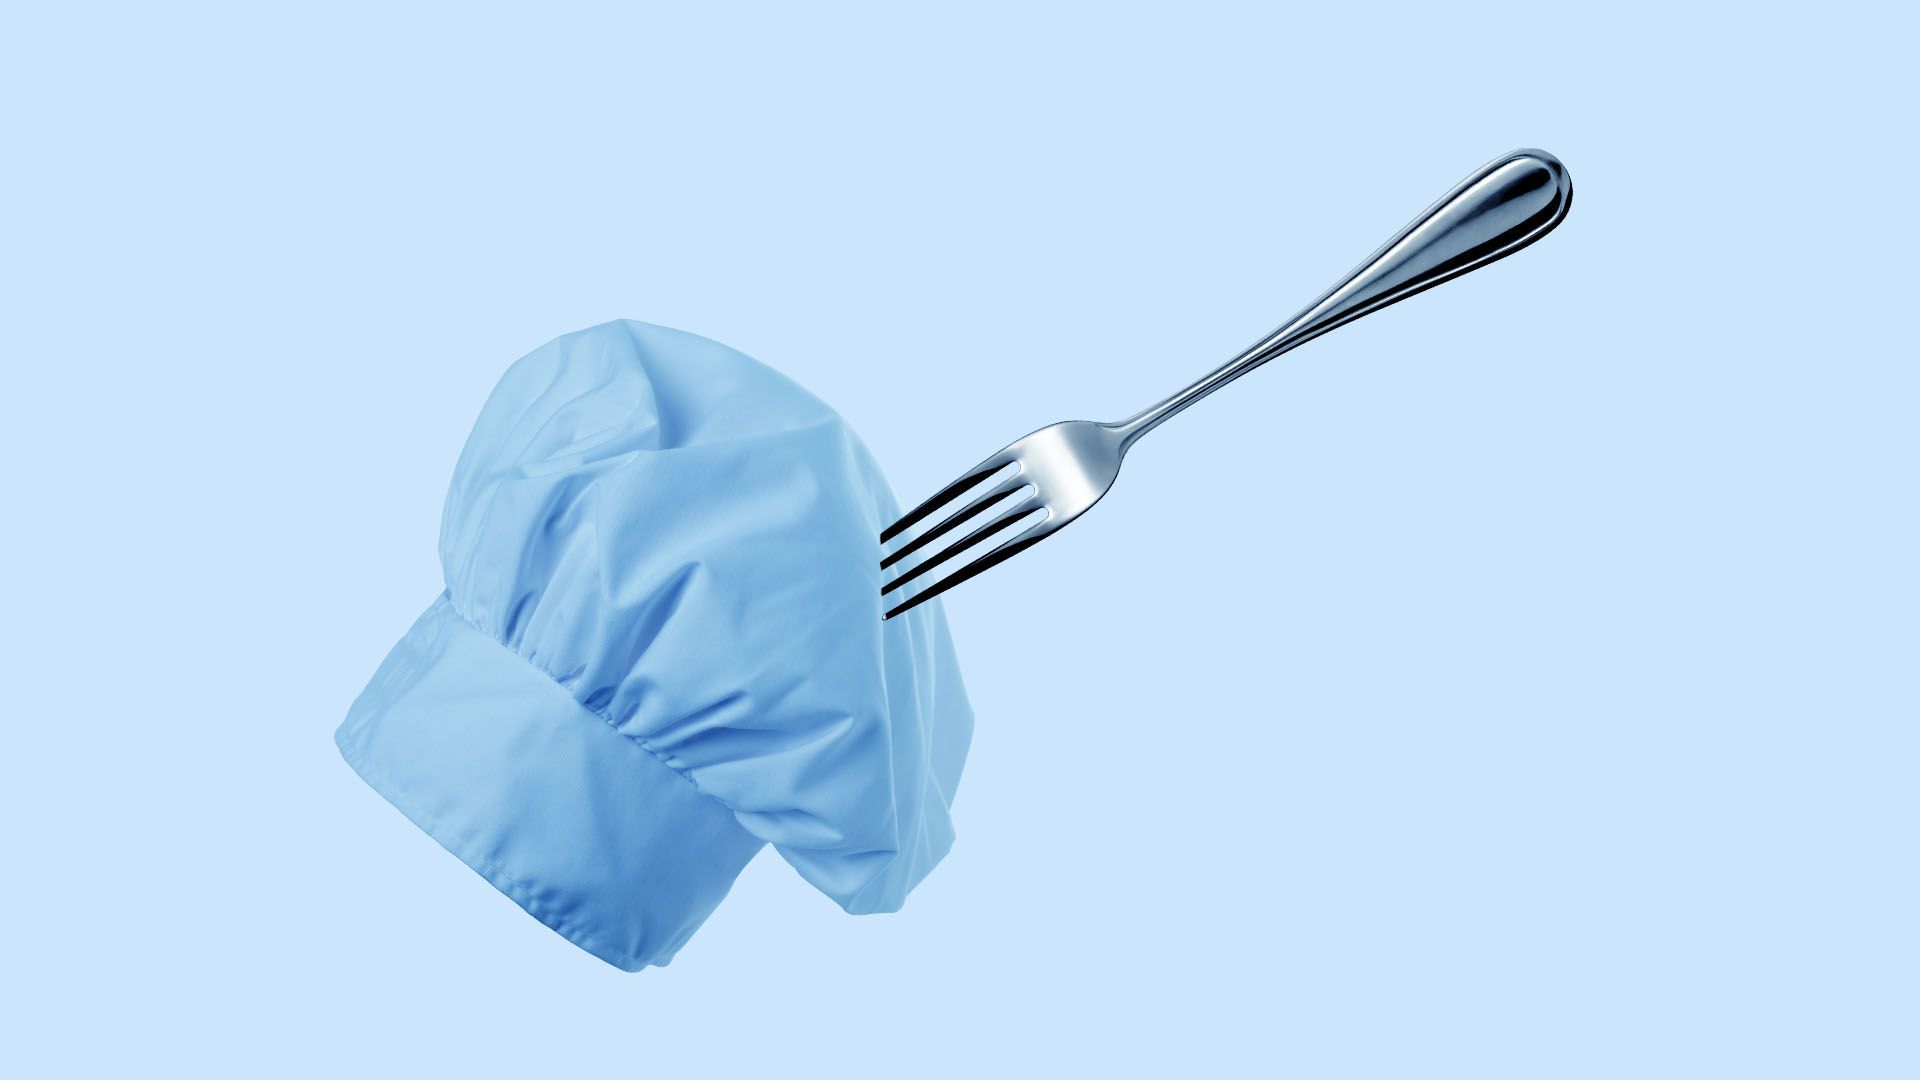 Illustration of a fork in a chef's hat